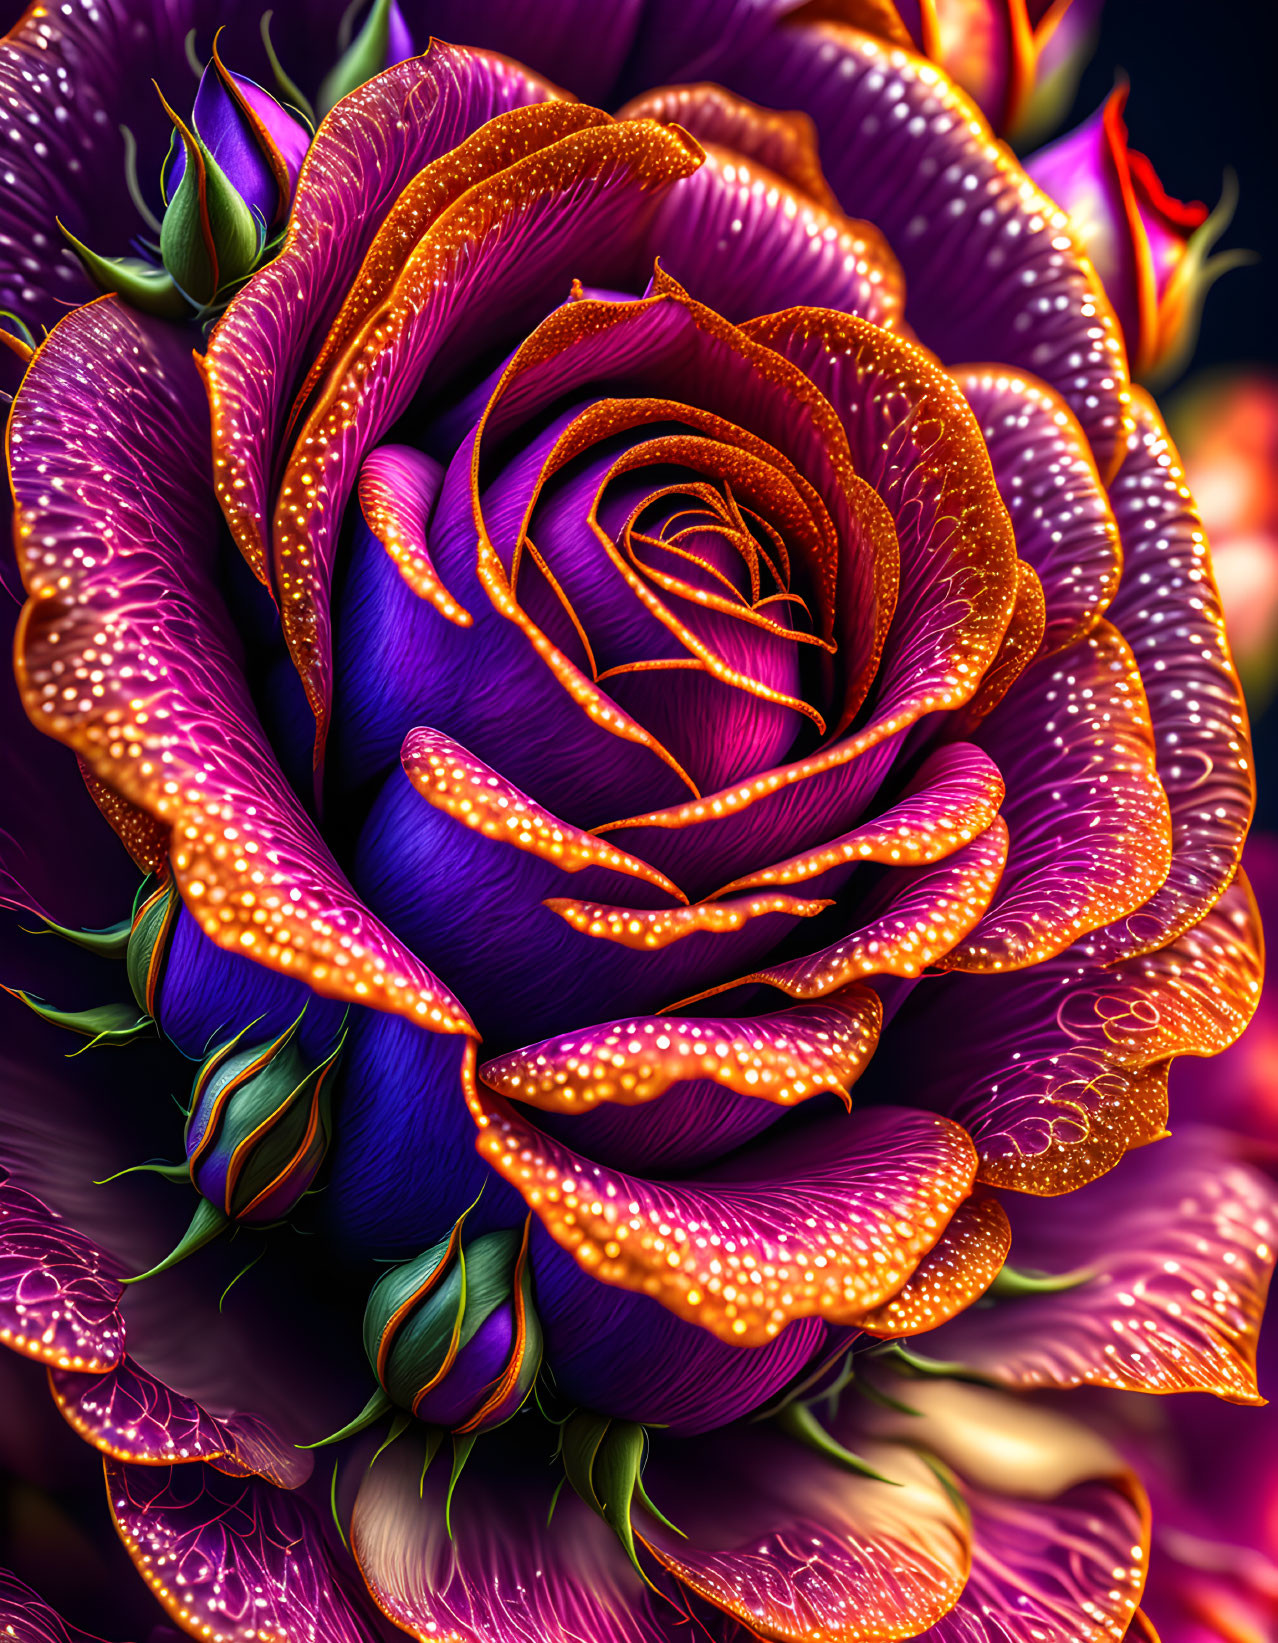 Detailed digital artwork: Fantasy rose with neon outlines and glowing petals